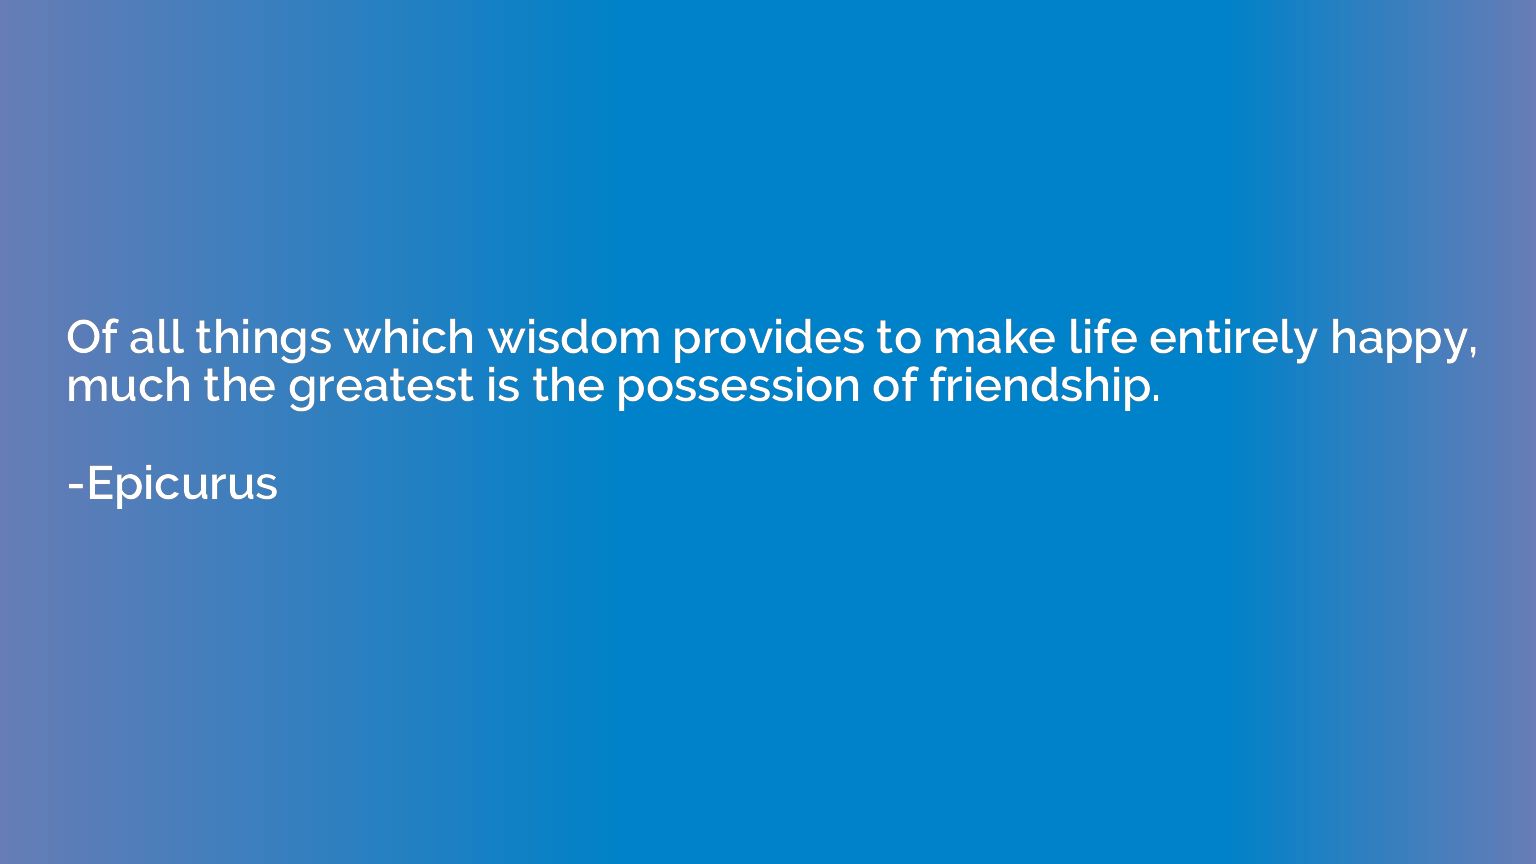 Of all things which wisdom provides to make life entirely ha